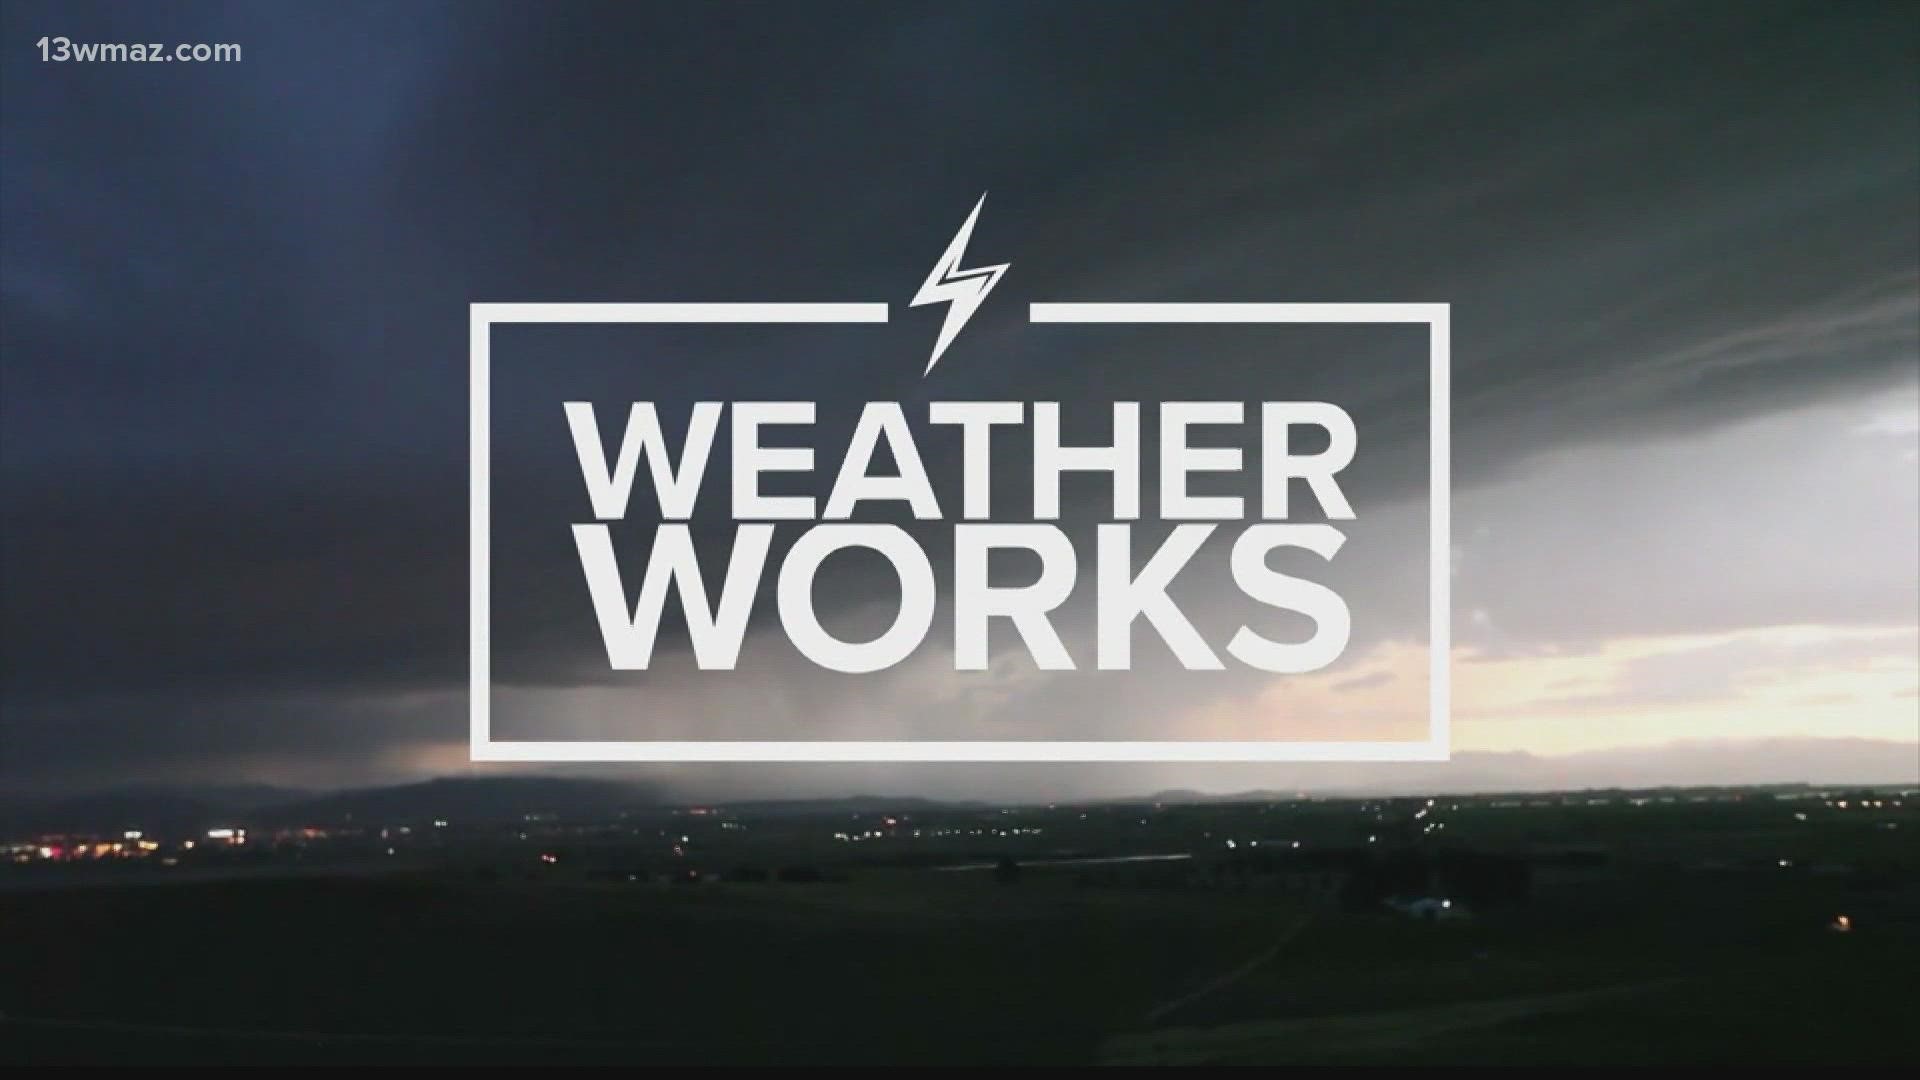 Meteorologist Taylor Stephenson highlights the ingredients that go into producing severe weather on this week's episode of Weather Works.